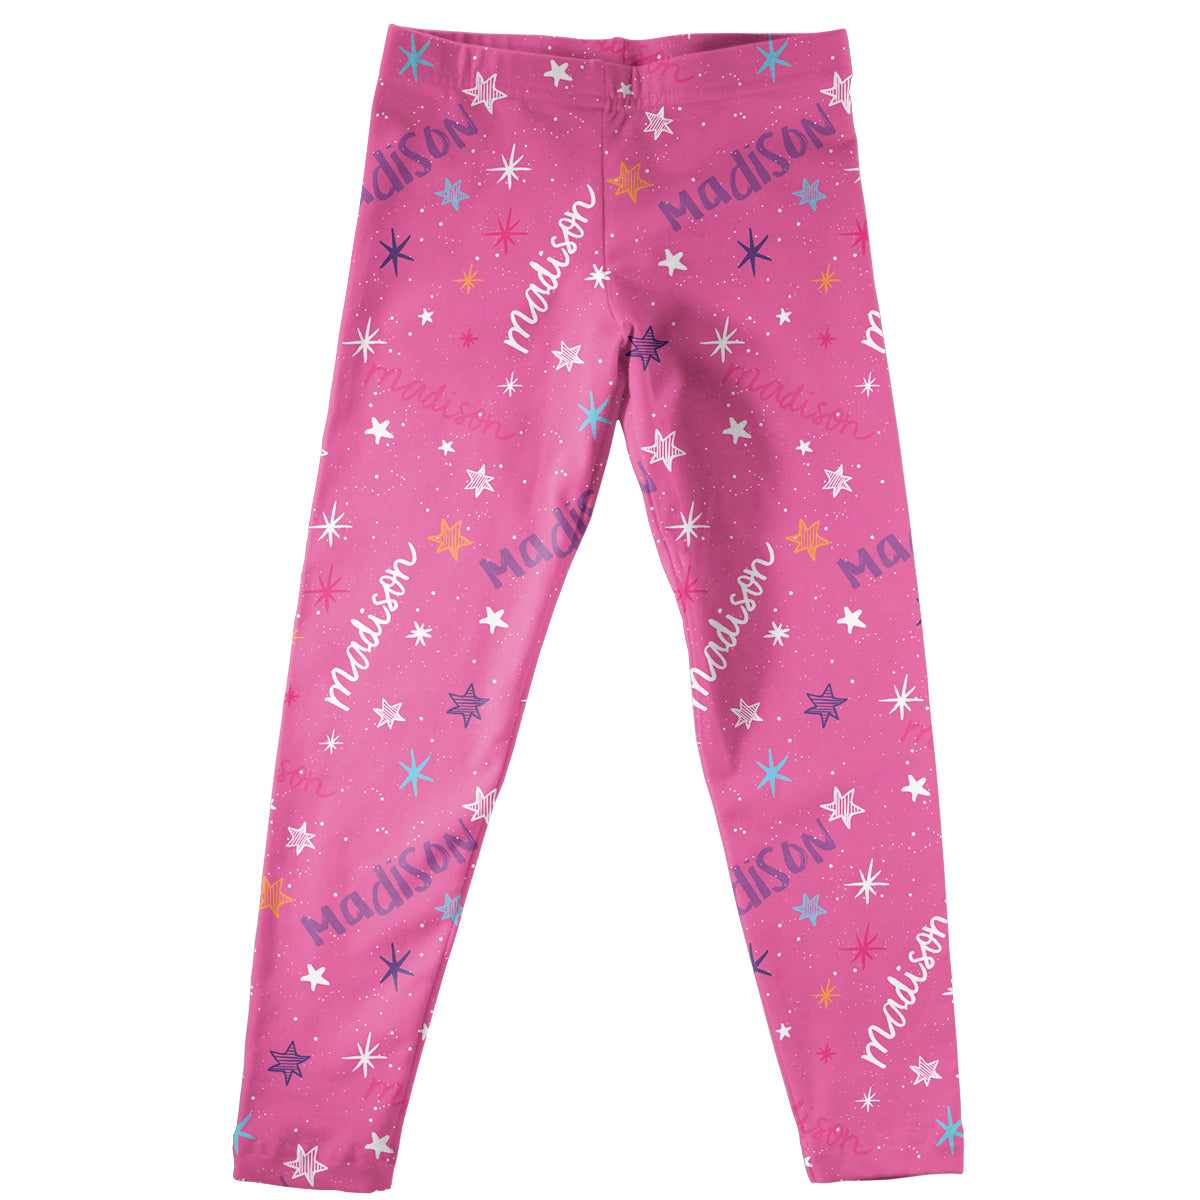 Pink leggings with stars and monogram - Wimziy&Co.